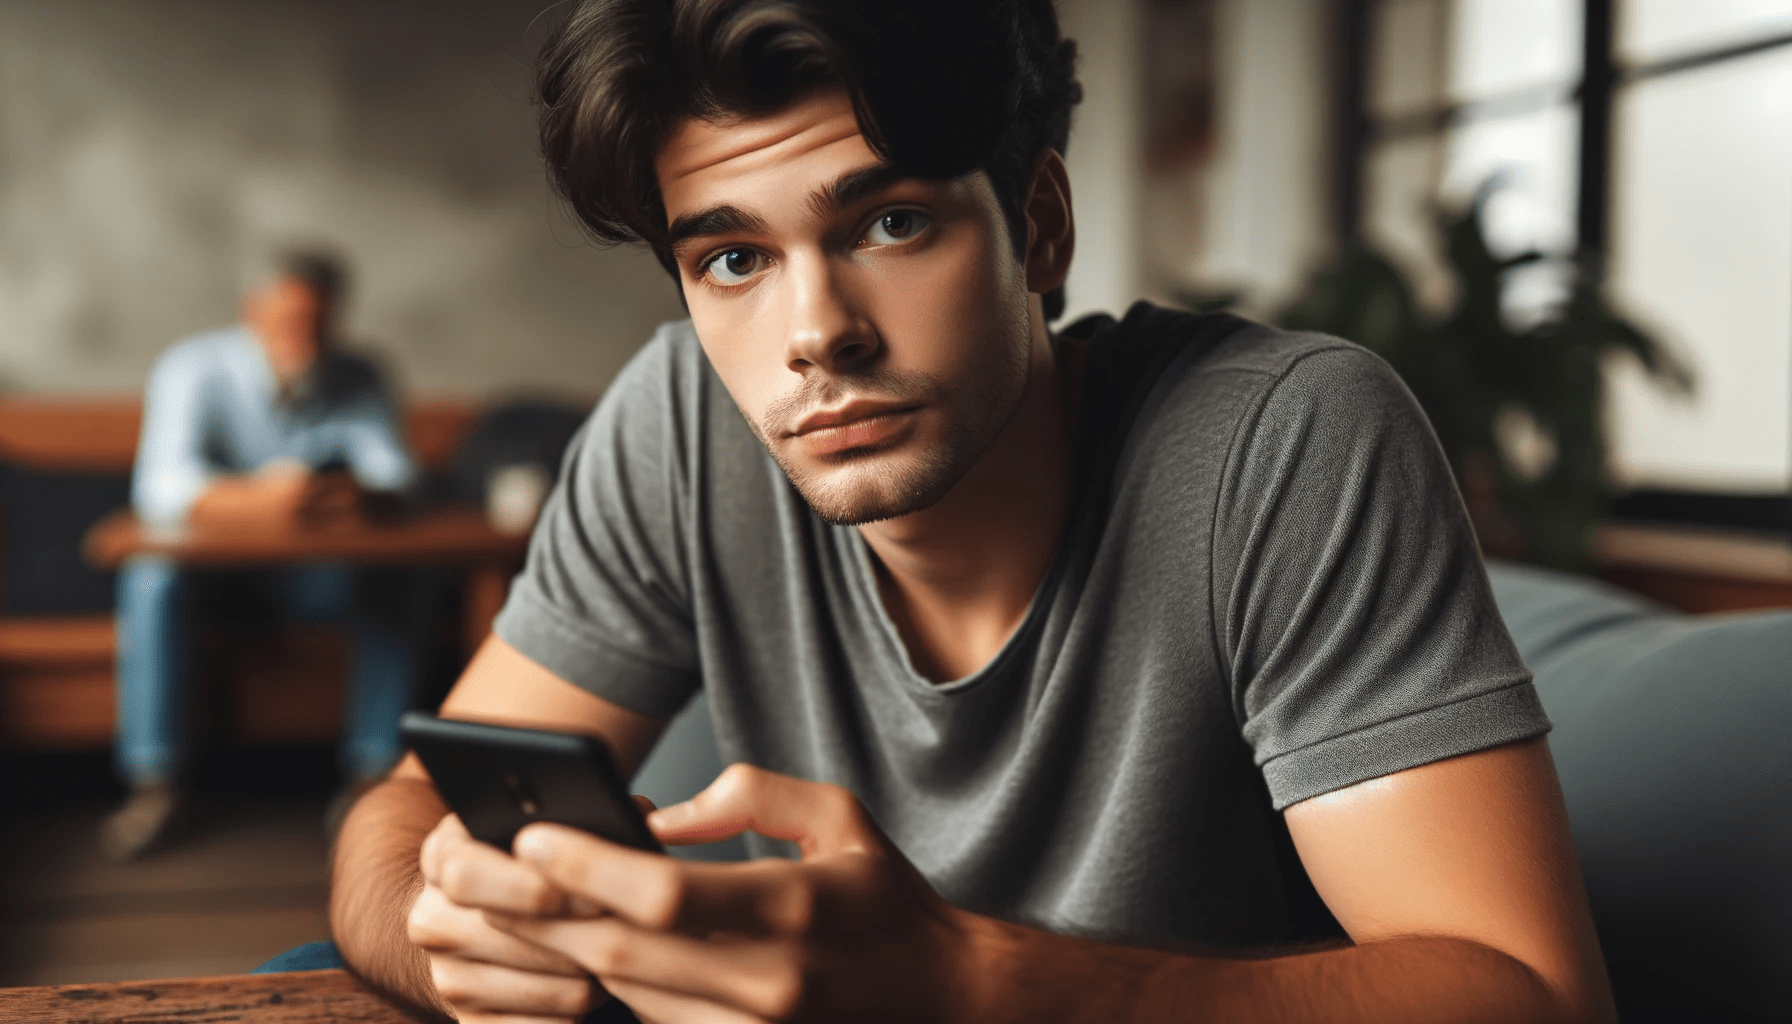 young man sitting in a casual setting perhaps a cafe or living room. Hes holding his phone and texting but his facial express